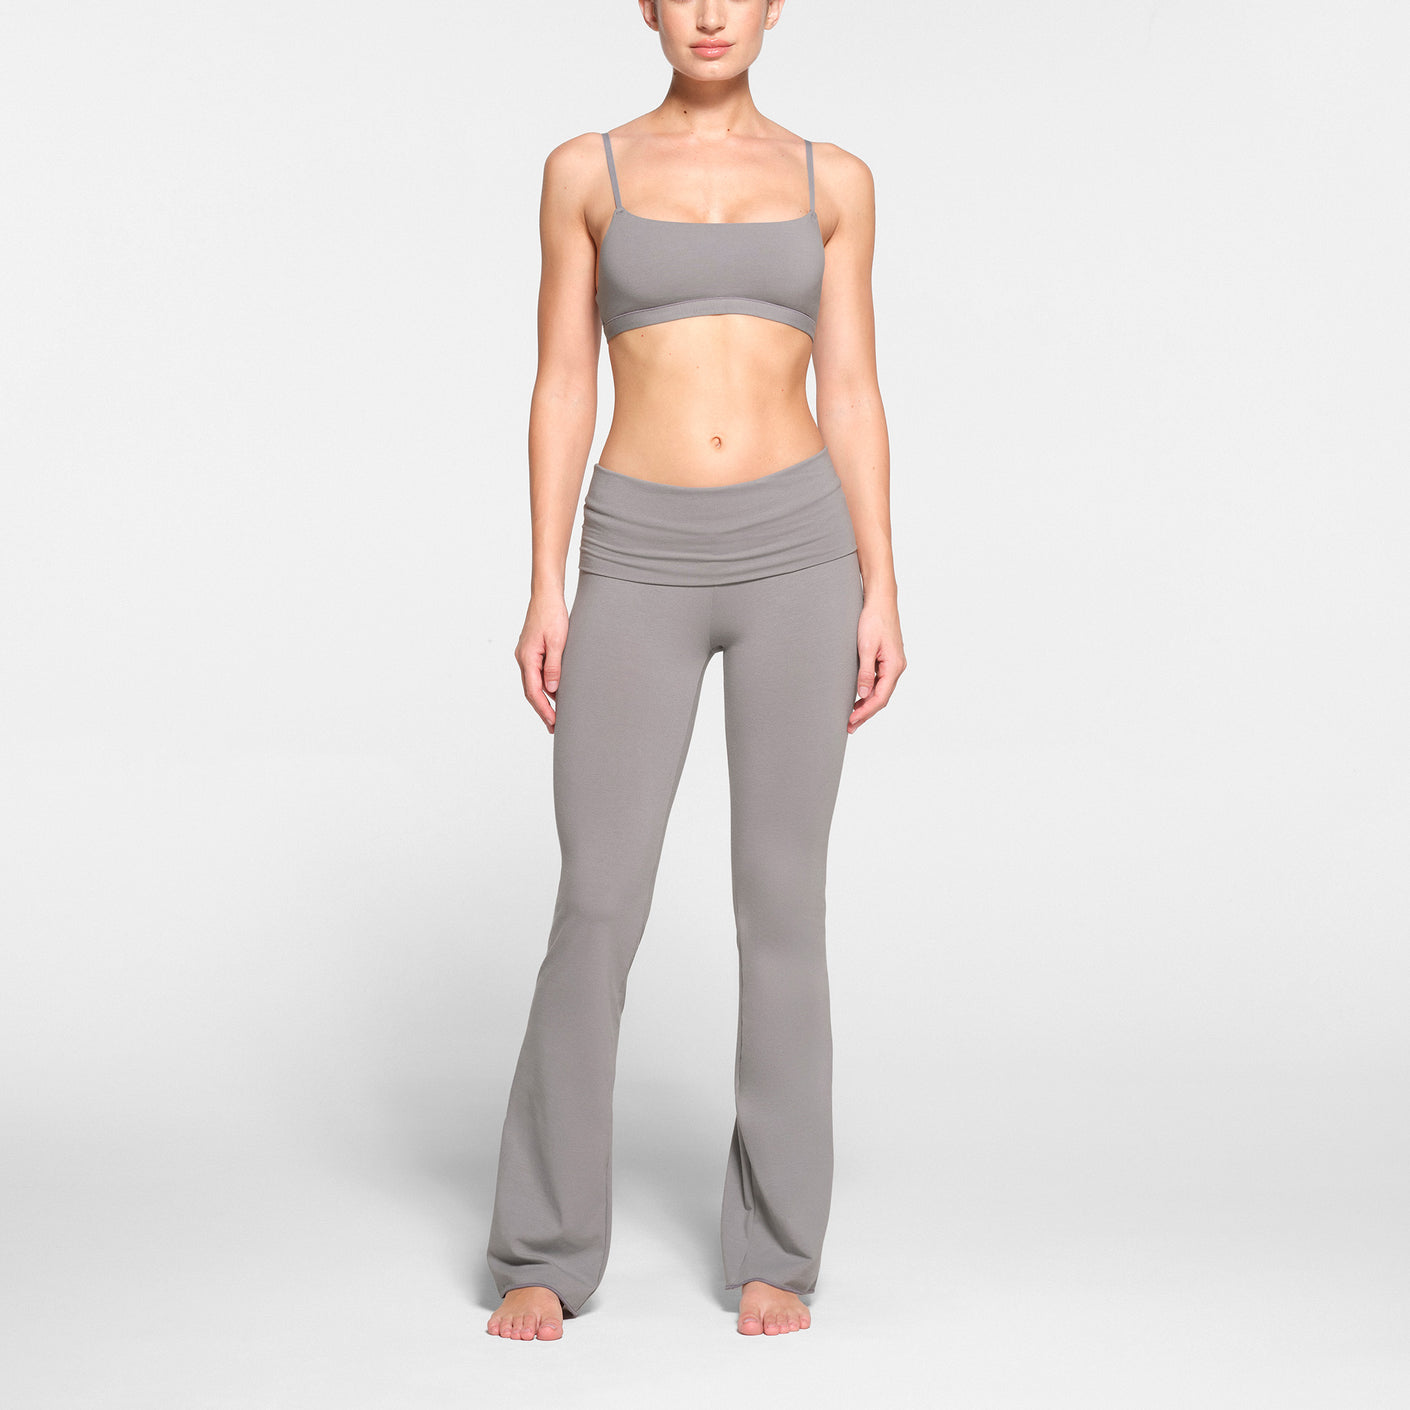 Cotton Jersey Foldover Pant - Spruce - 4X is in stock at Skims for $62.00 :  r/SkimsRestockAlerts